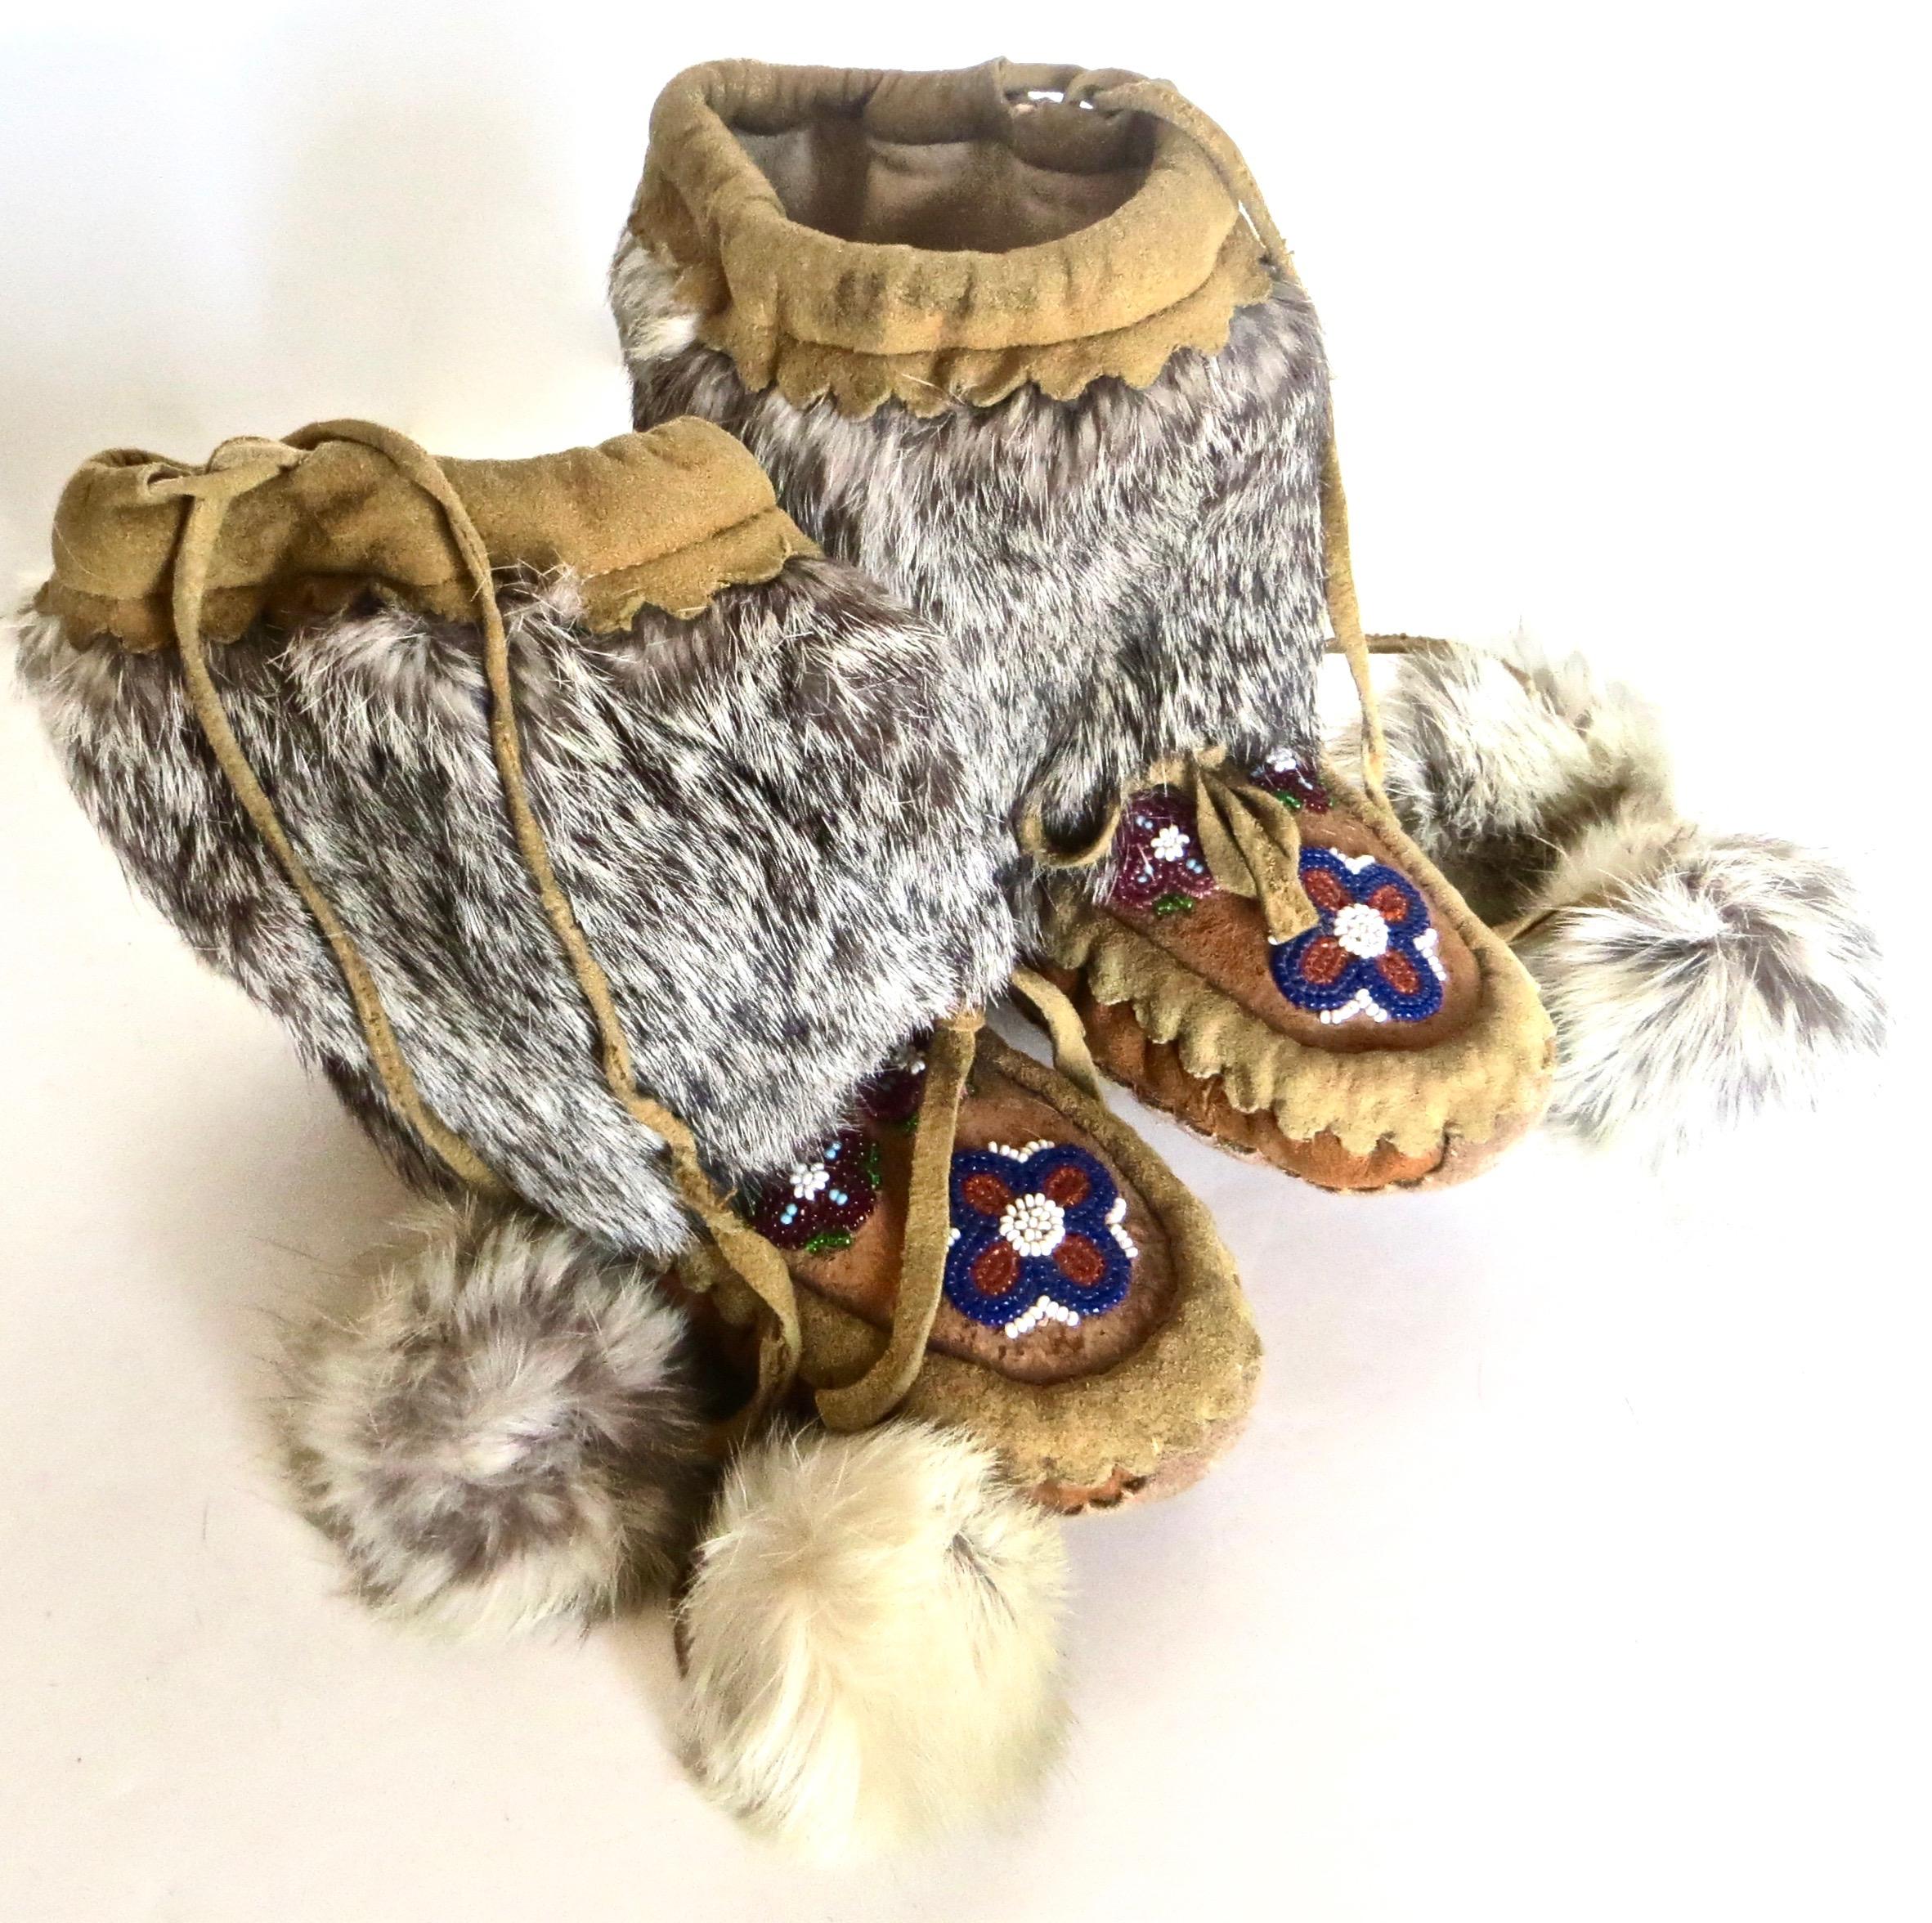 Pair of Native American Indian child sized moccasins, likely from the Pacific northwest tribe, the Makah Indians, who inhabited the Olympic peninsula. They lived in a colder climate and were noted for whaling. This accounts for their use of animal